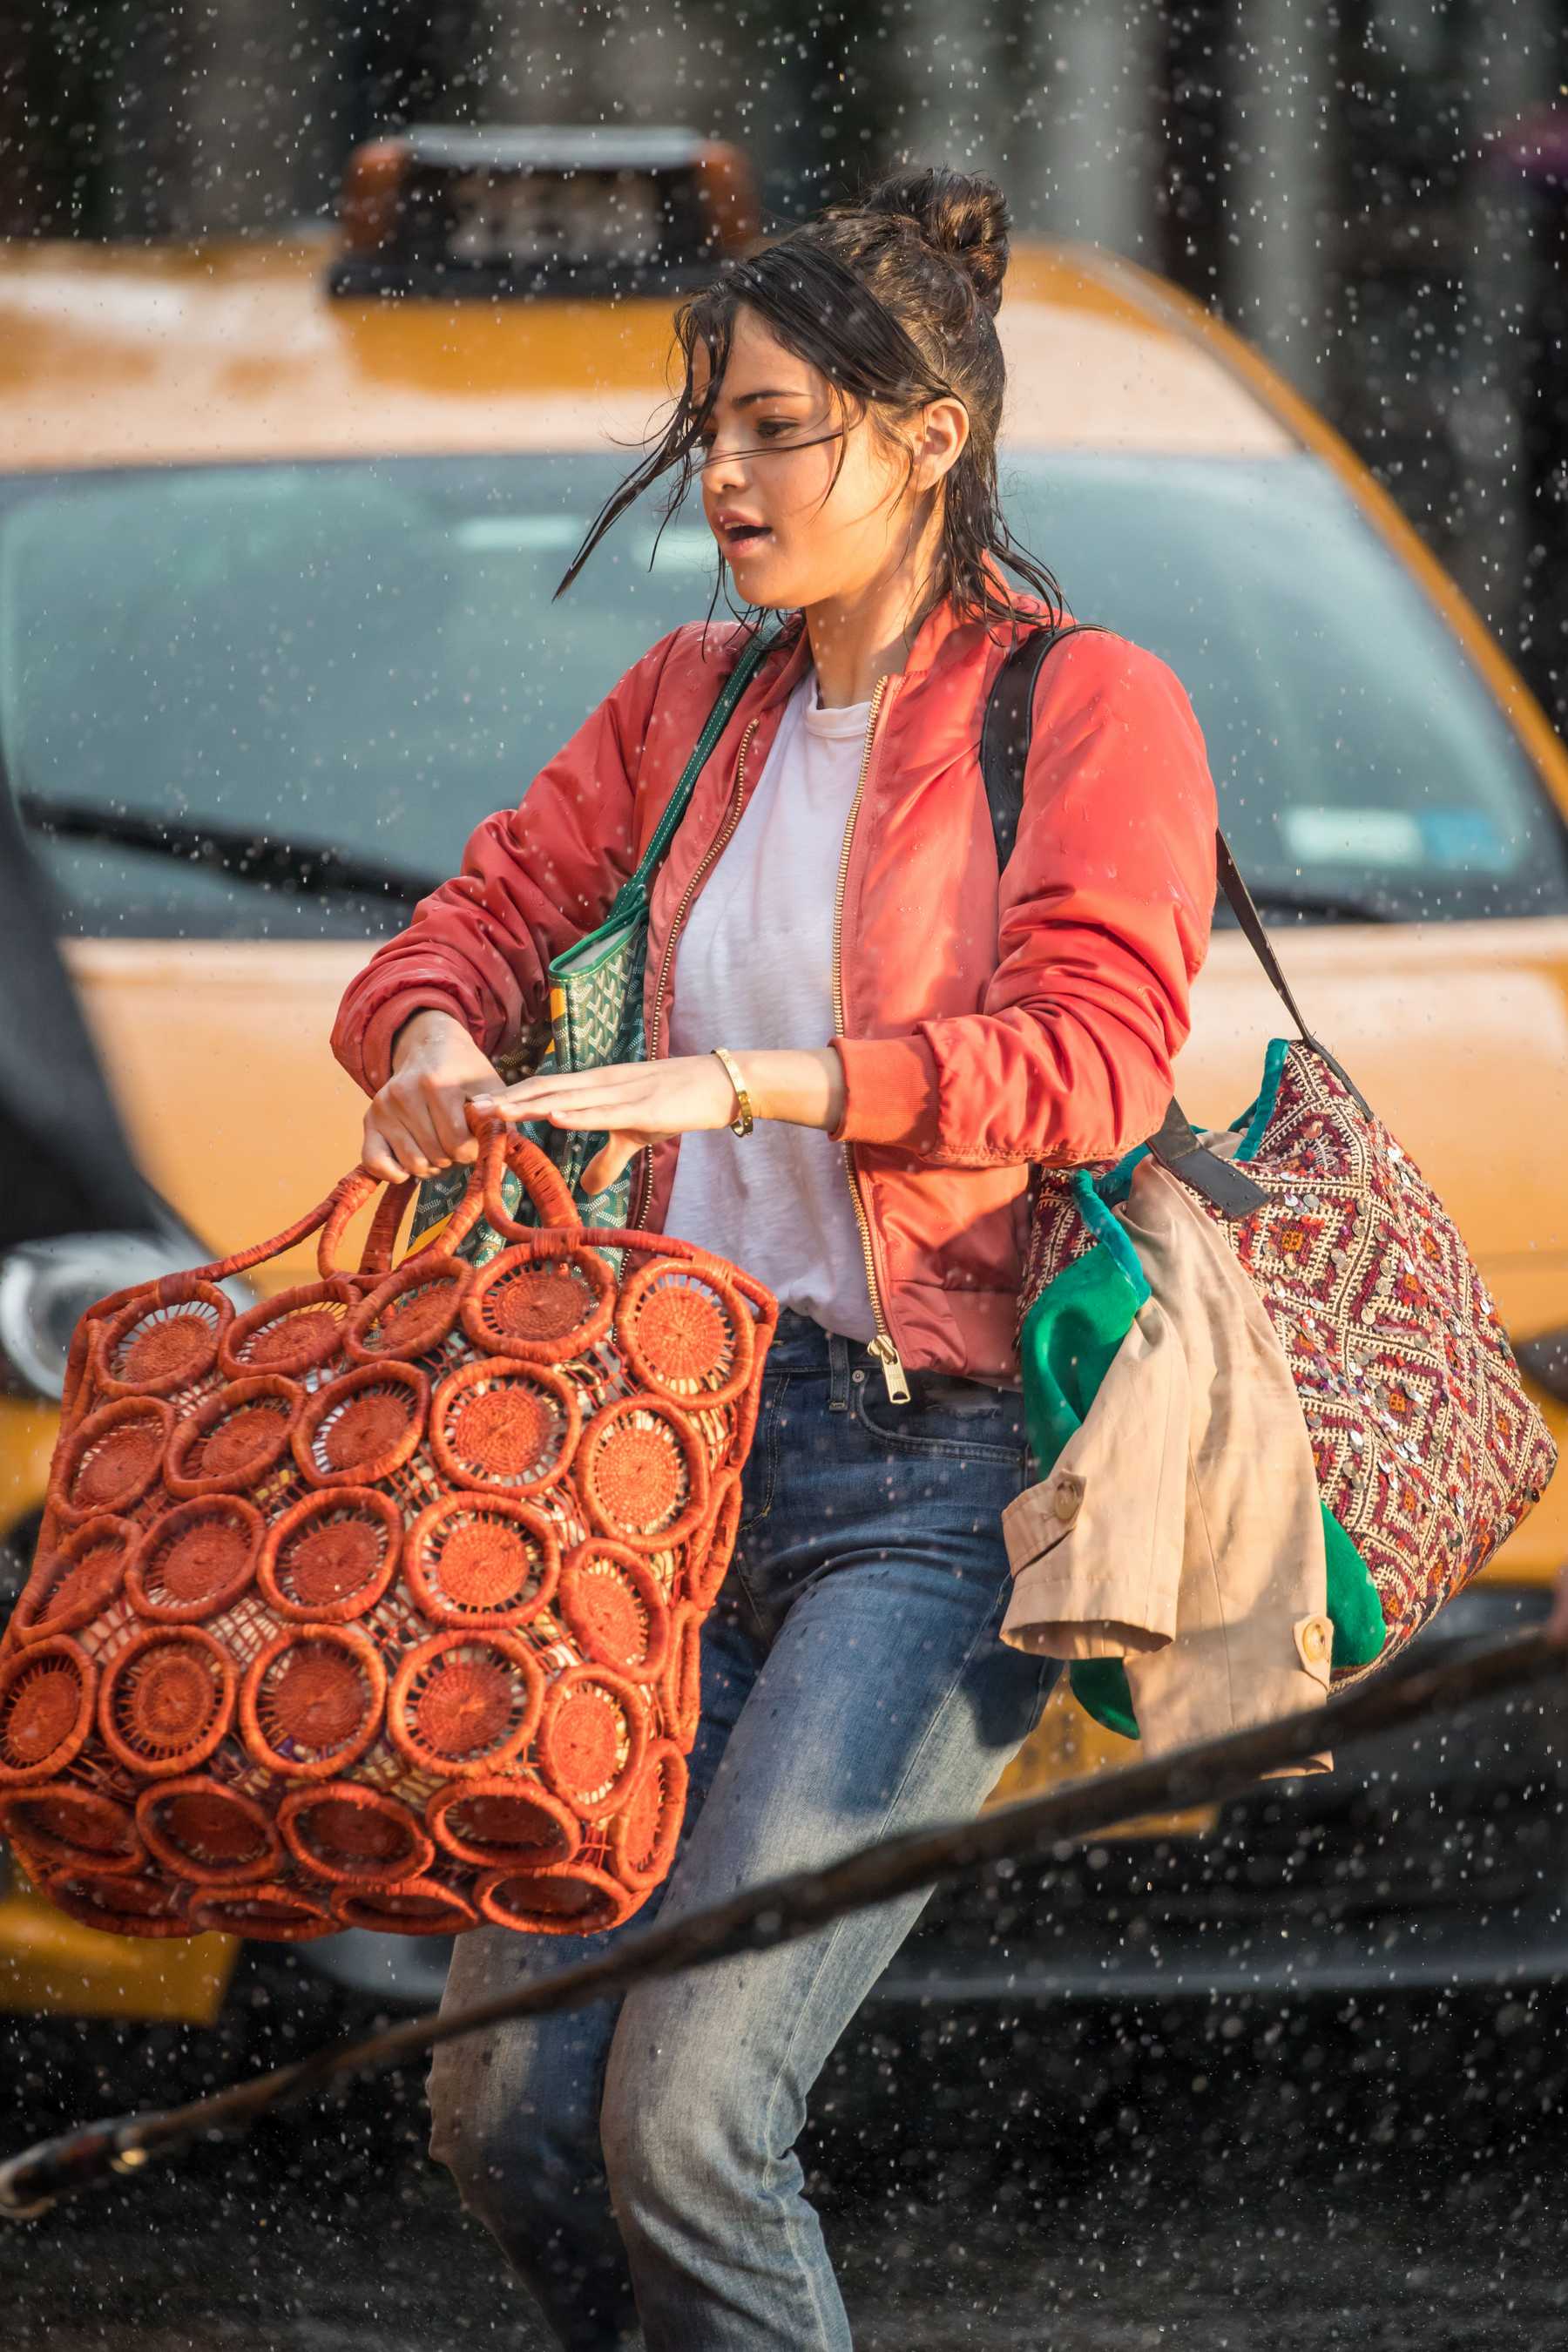 Selena_Gomez_-_Filming_Woody_Allen_film_with_her_puppy_in_NYC_on_September_19-34.jpg